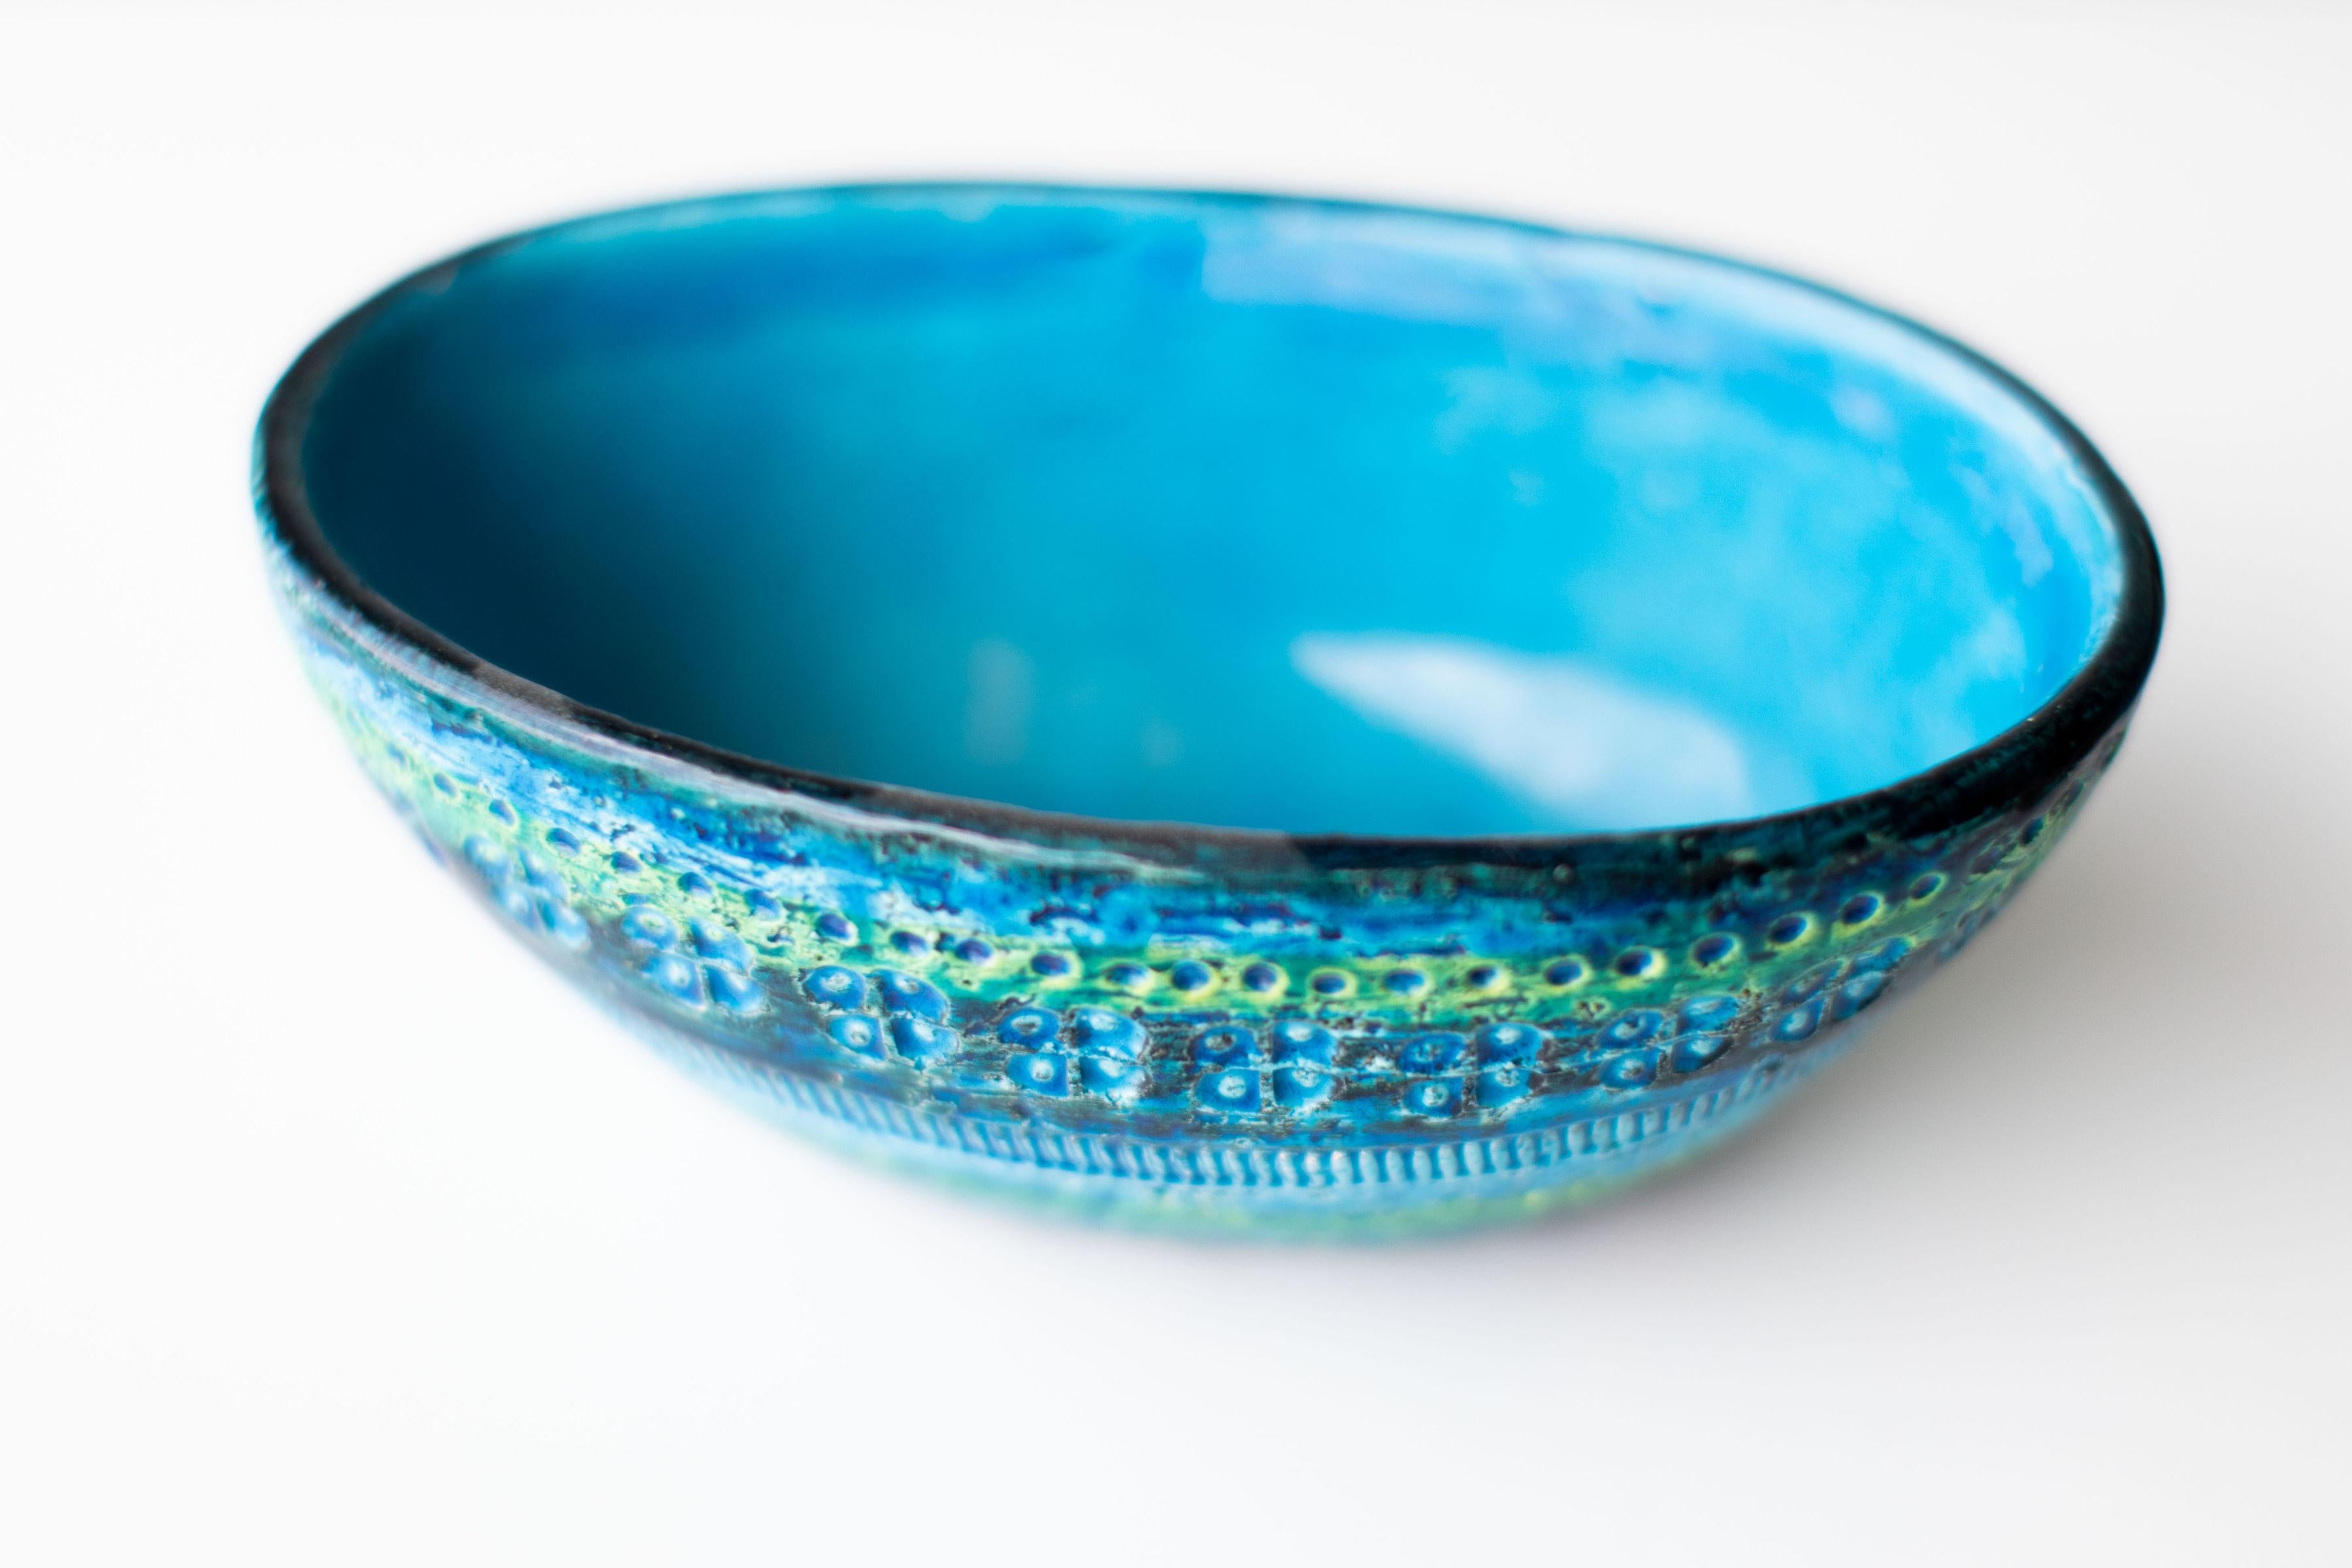 Designer: Aldo Londi 

Importer: Raymor.
Period or model: Mid-Century Modern. 
Specs: Pottery

Condition: 

This Bitossi Italian pottery bowl remini blue Imported by Raymor is in excellent vintage condition. There are no chips or